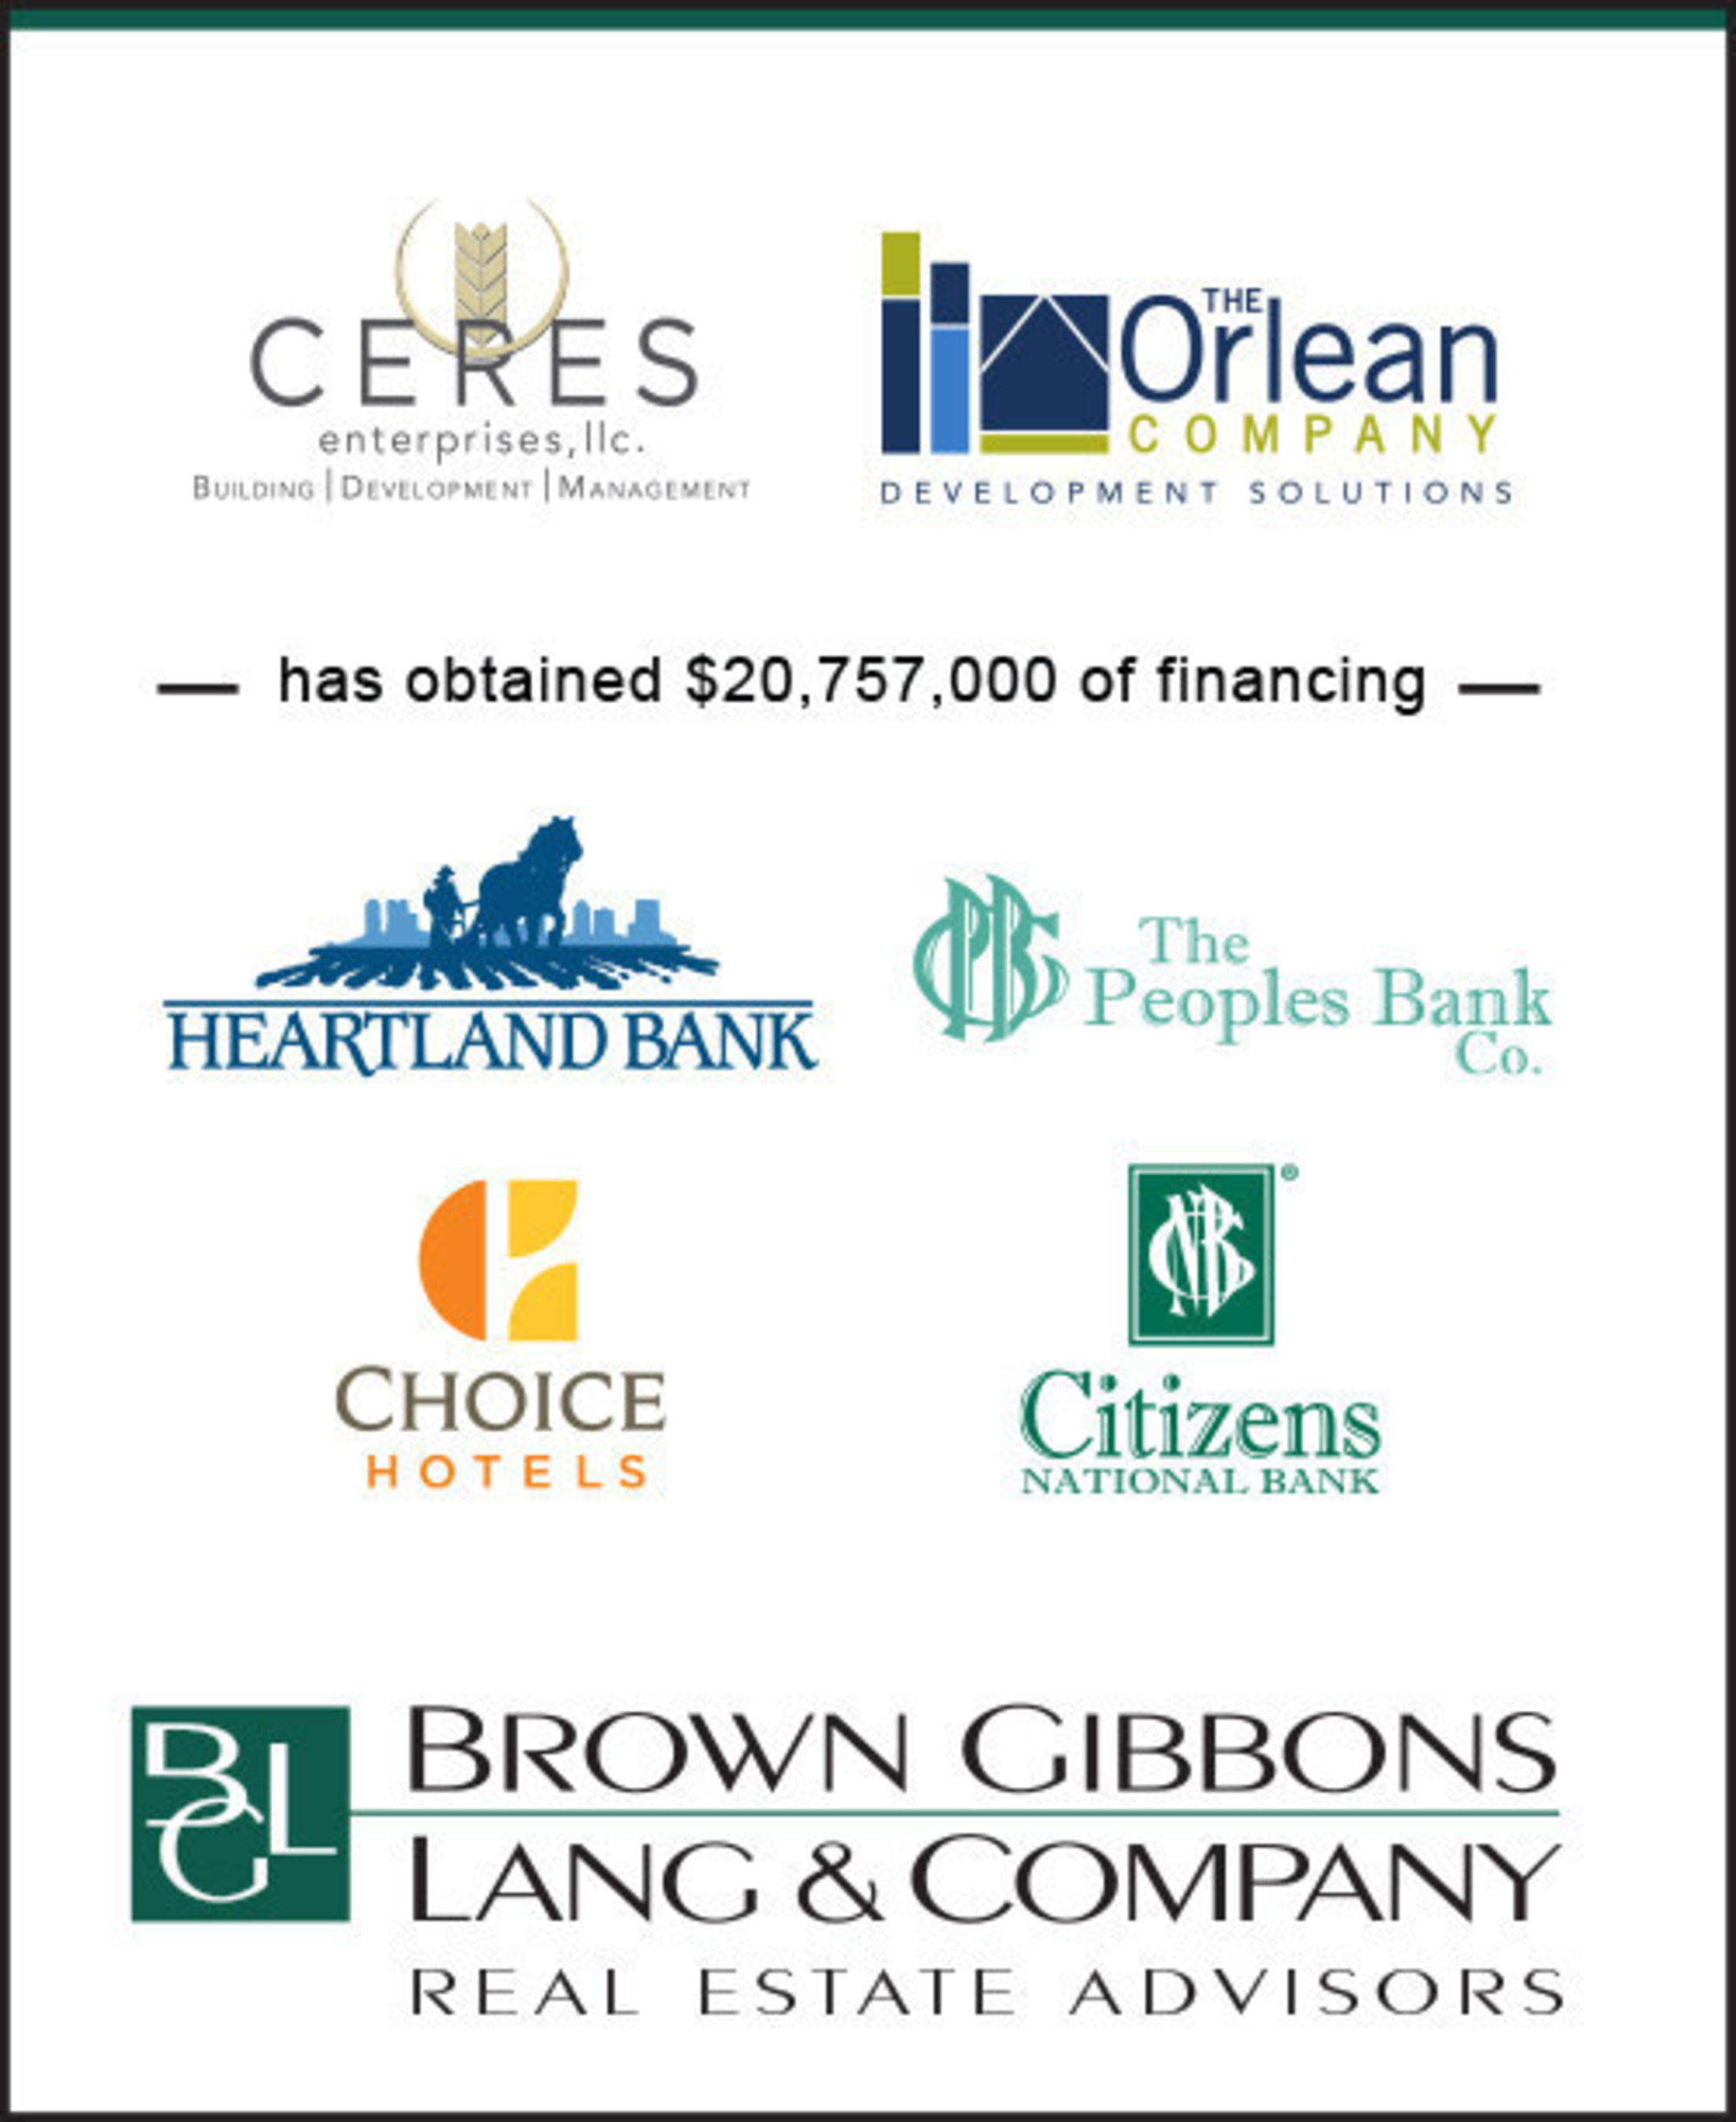 BGL Real Estate Advisors LLC is pleased to announce the successful completion of development financing for Ceres Enterprises LLC and The Orlean Company.  The capital structure will support the third development of Choice Hotel's new limited service brand in Westfield, Indiana, joining properties in Noblesville, Indiana and Avon, Ohio.